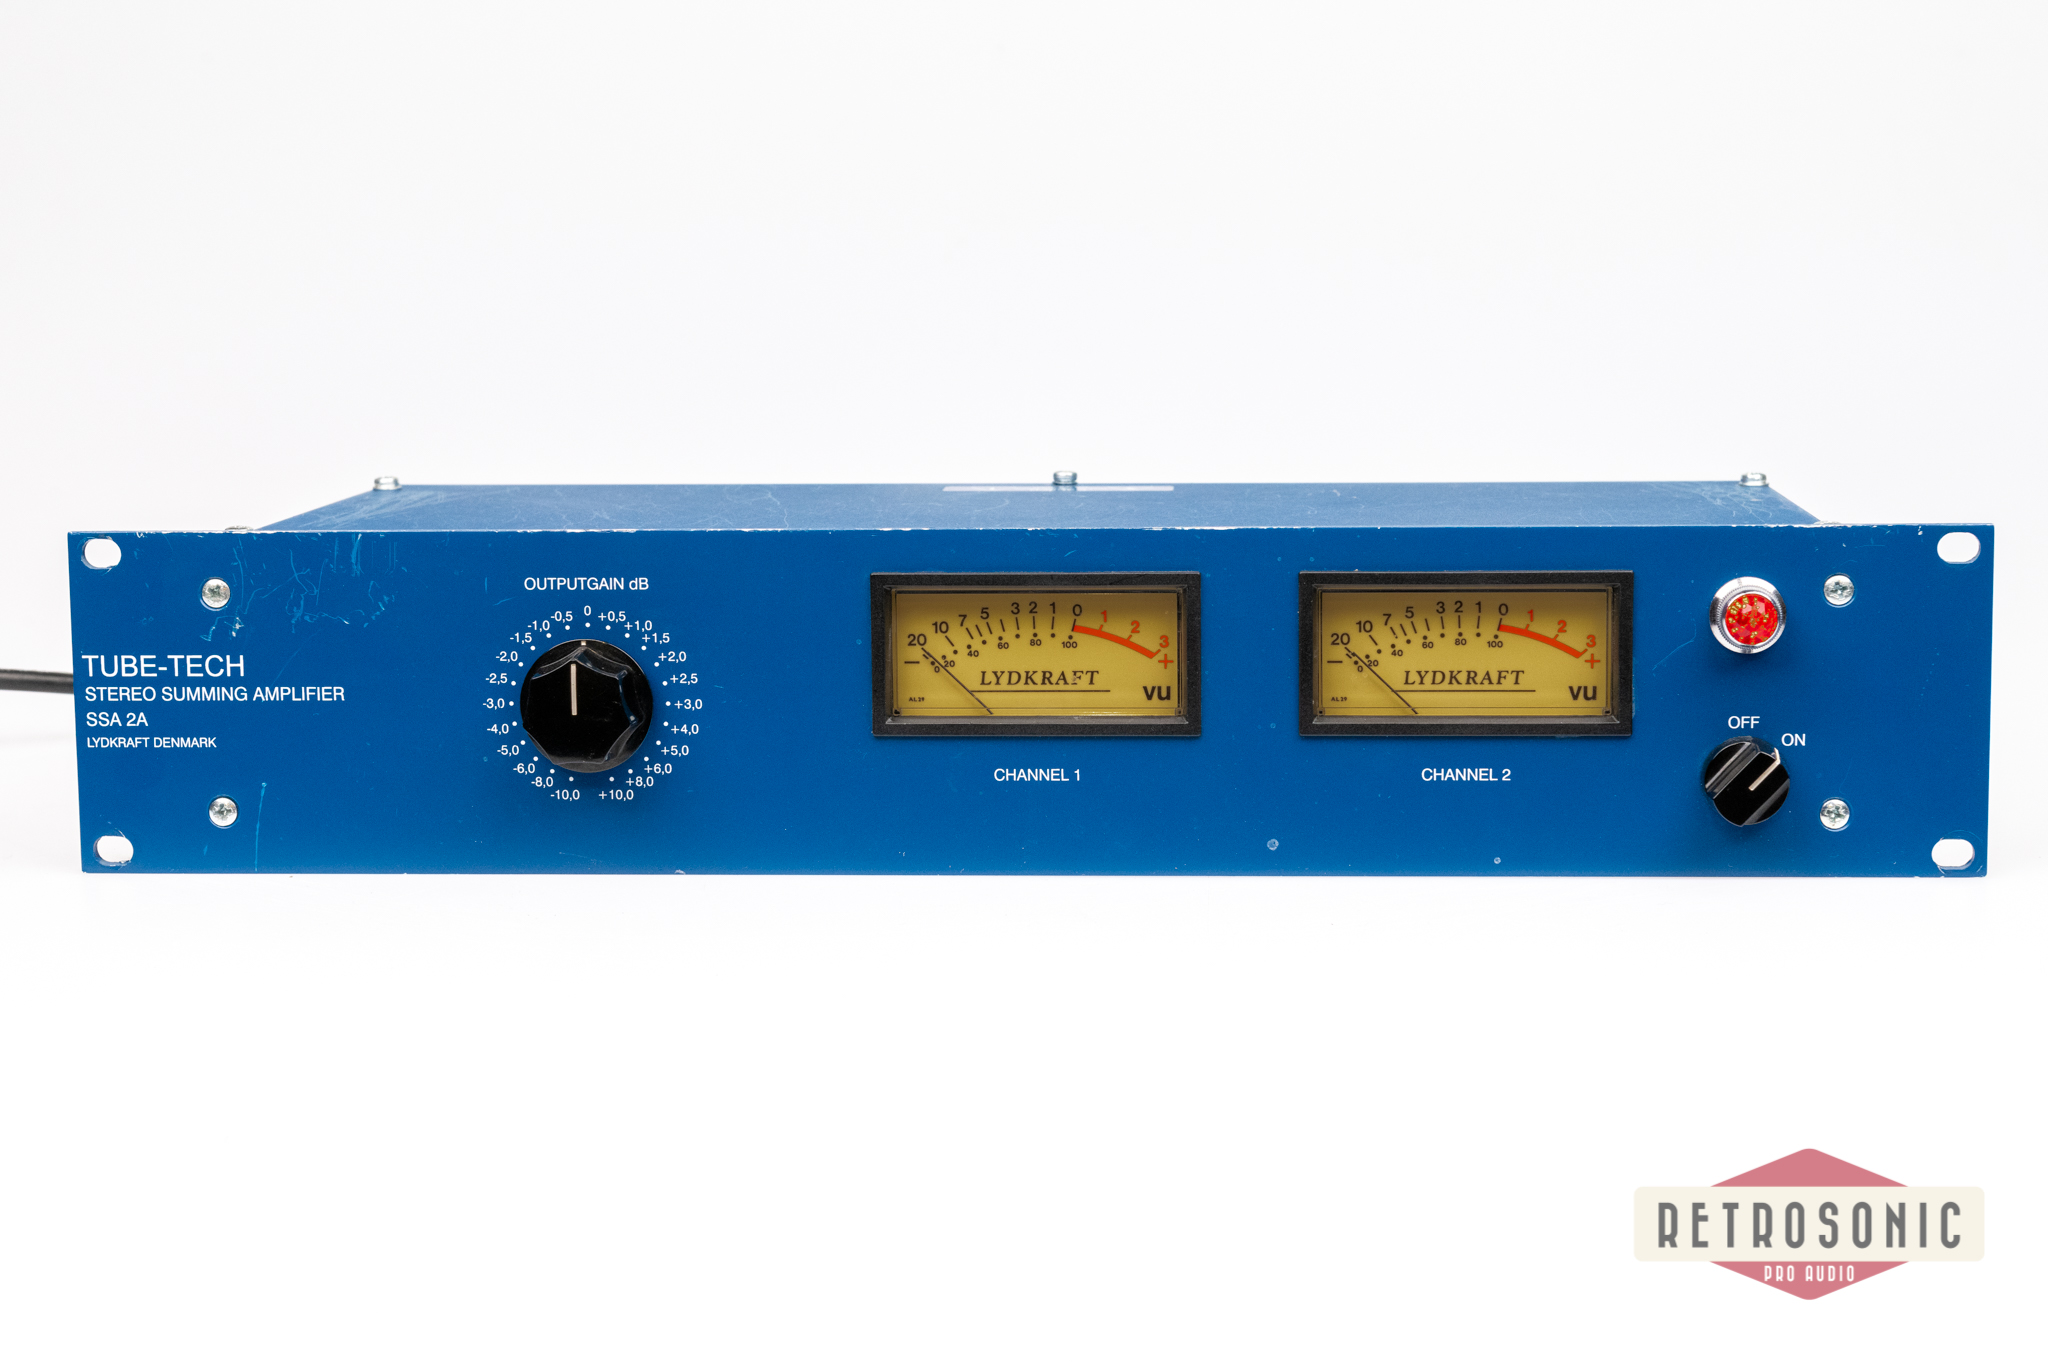 Tube-Tech SSA 2A Stereo Summing Amplifier